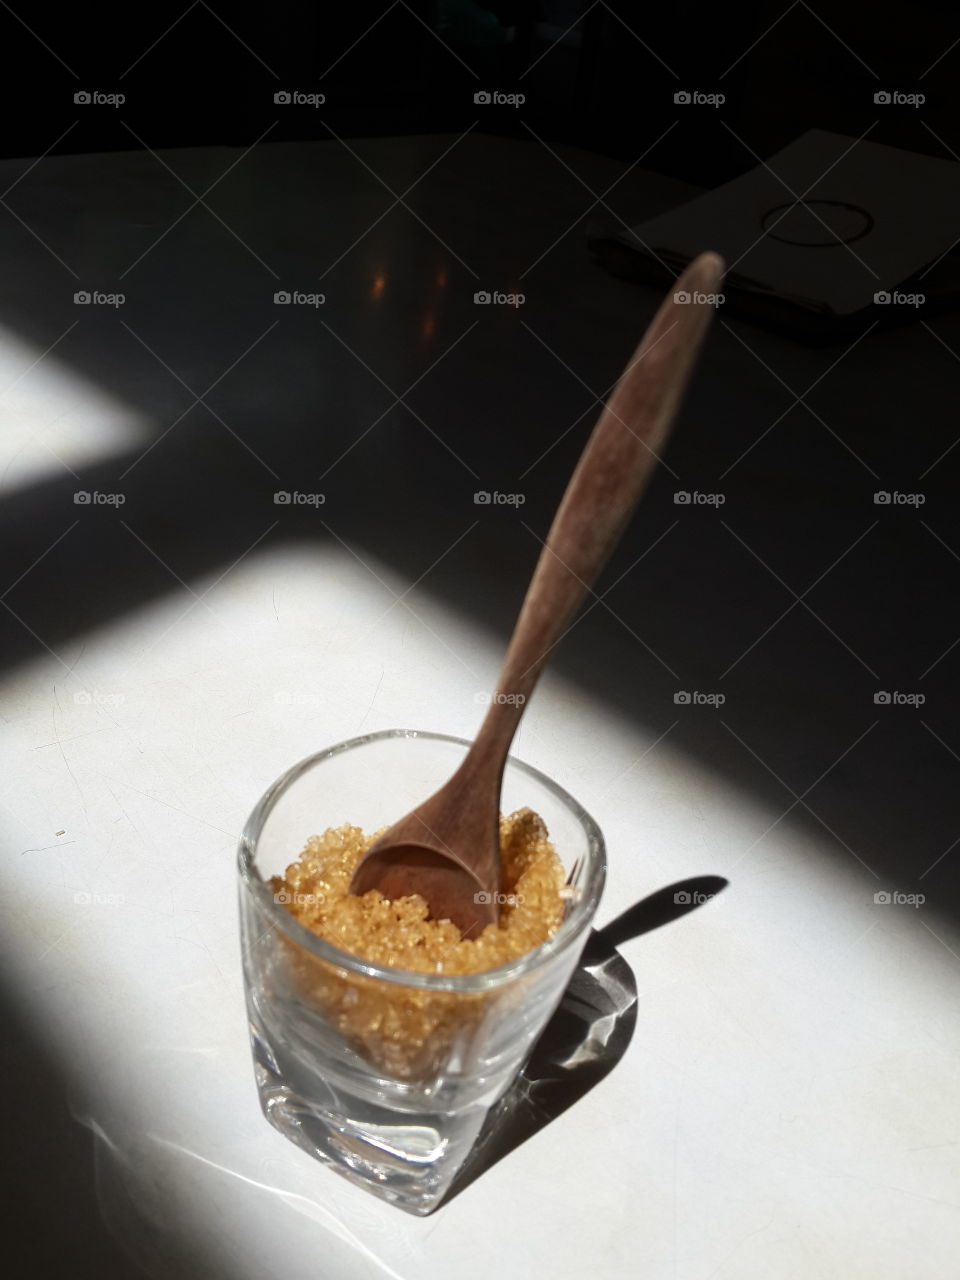 brown sugar in small glass and classic wooden spoon . set